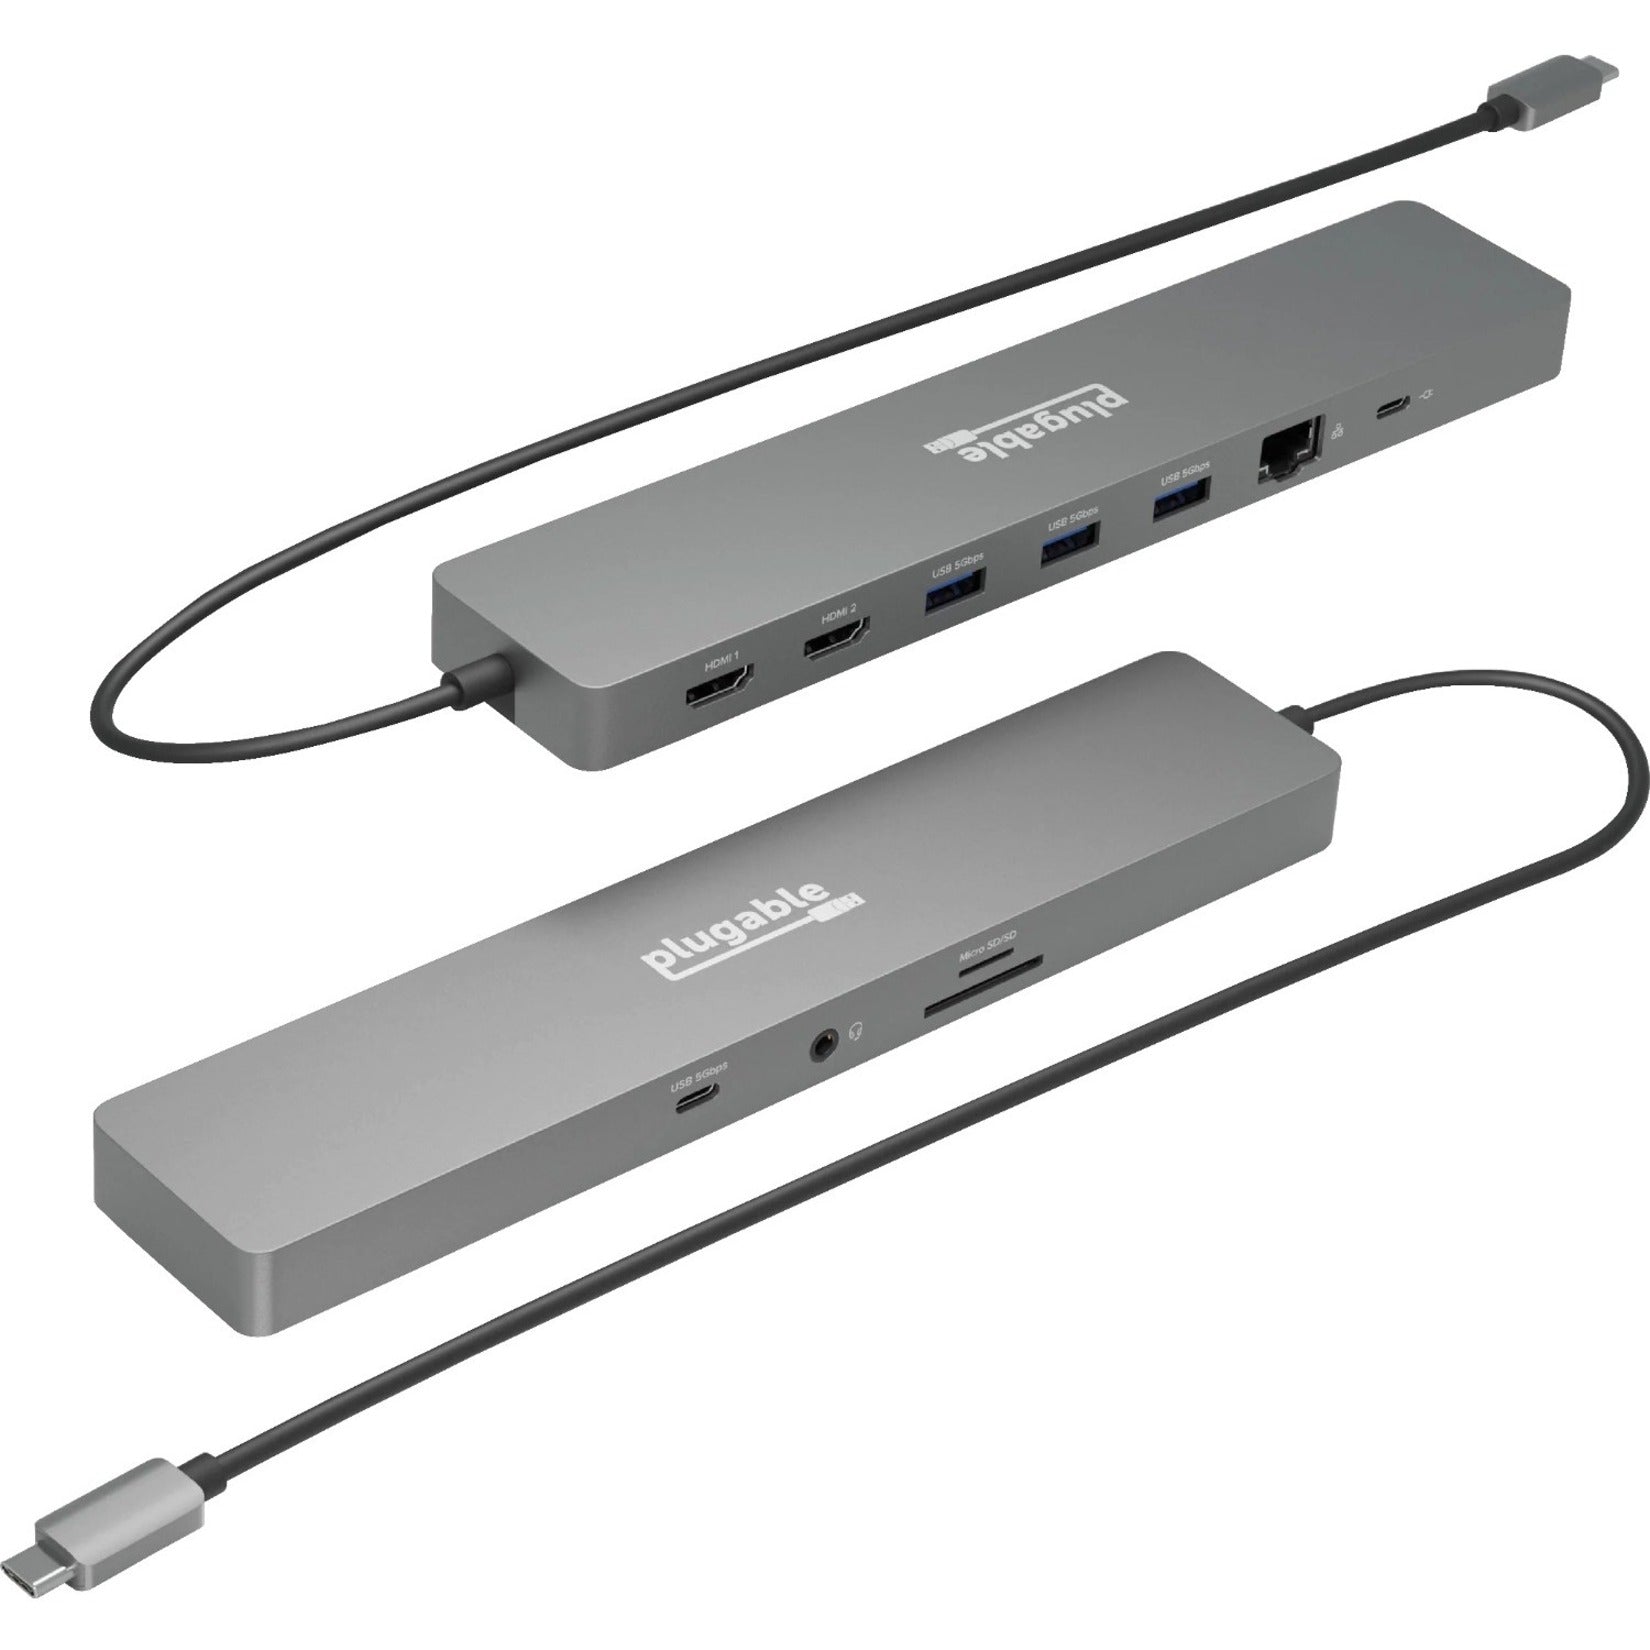 Plugable USBC-11IN1E USB-C 11-IN-1 Hub With Ethernet, 100W USB-C Pass-through, Dual Monitor Docking Station, 4K HDMI